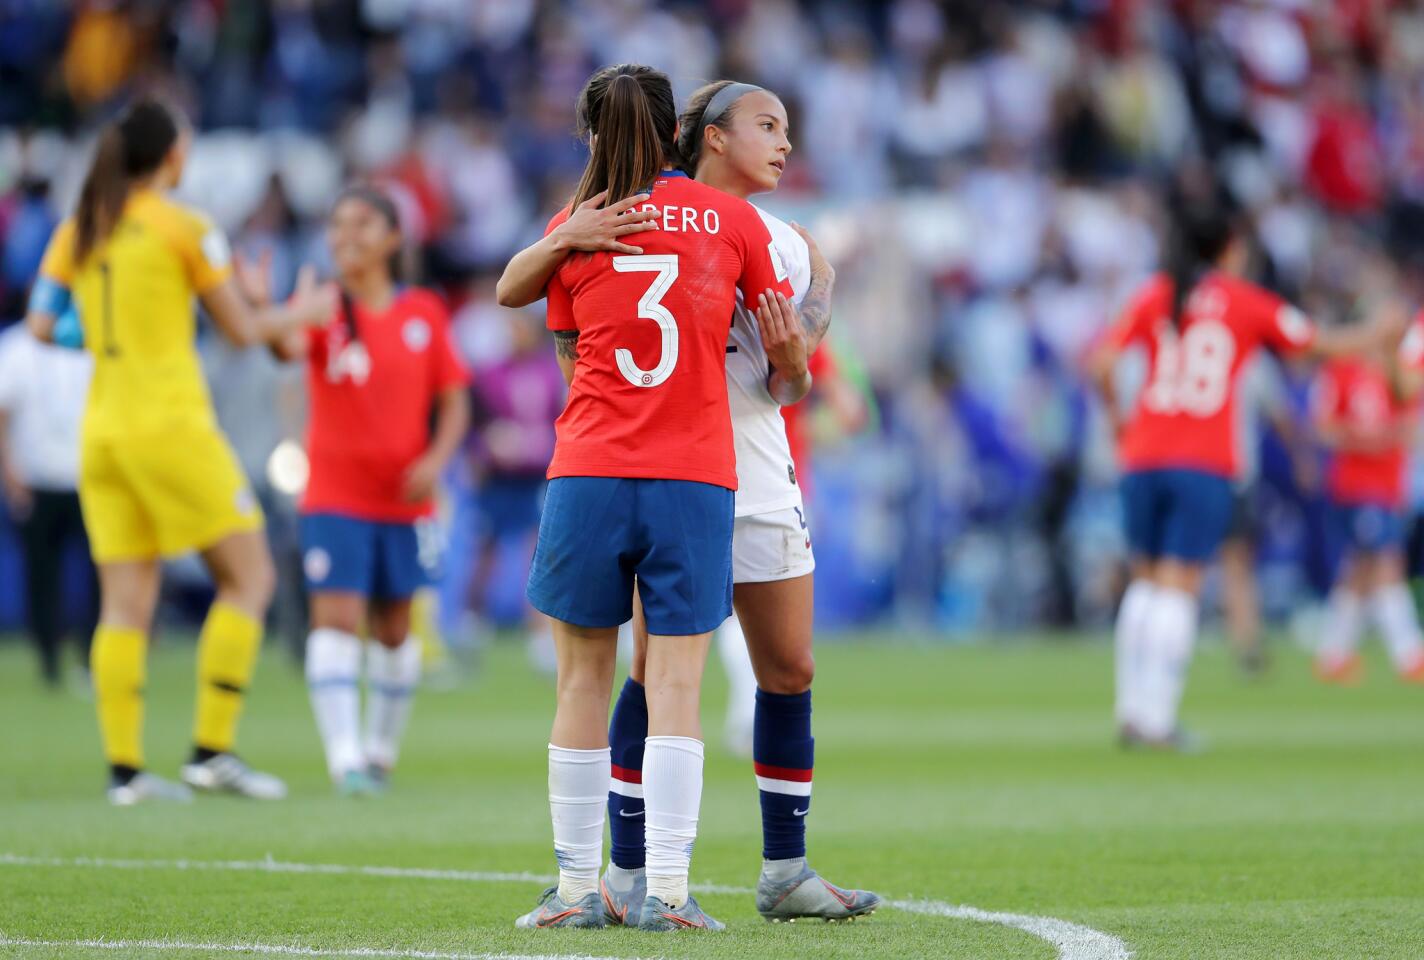 PARIS, FRANCE - JUNE 16: Mallory Pugh of the USA embraces Carla Guerrero of Chile after the 2019 FIFA Women's World Cup France group F match between USA and Chile at Parc des Princes on June 16, 2019 in Paris, France. (Photo by Richard Heathcote/Getty Images) ** OUTS - ELSENT, FPG, CM - OUTS * NM, PH, VA if sourced by CT, LA or MoD **